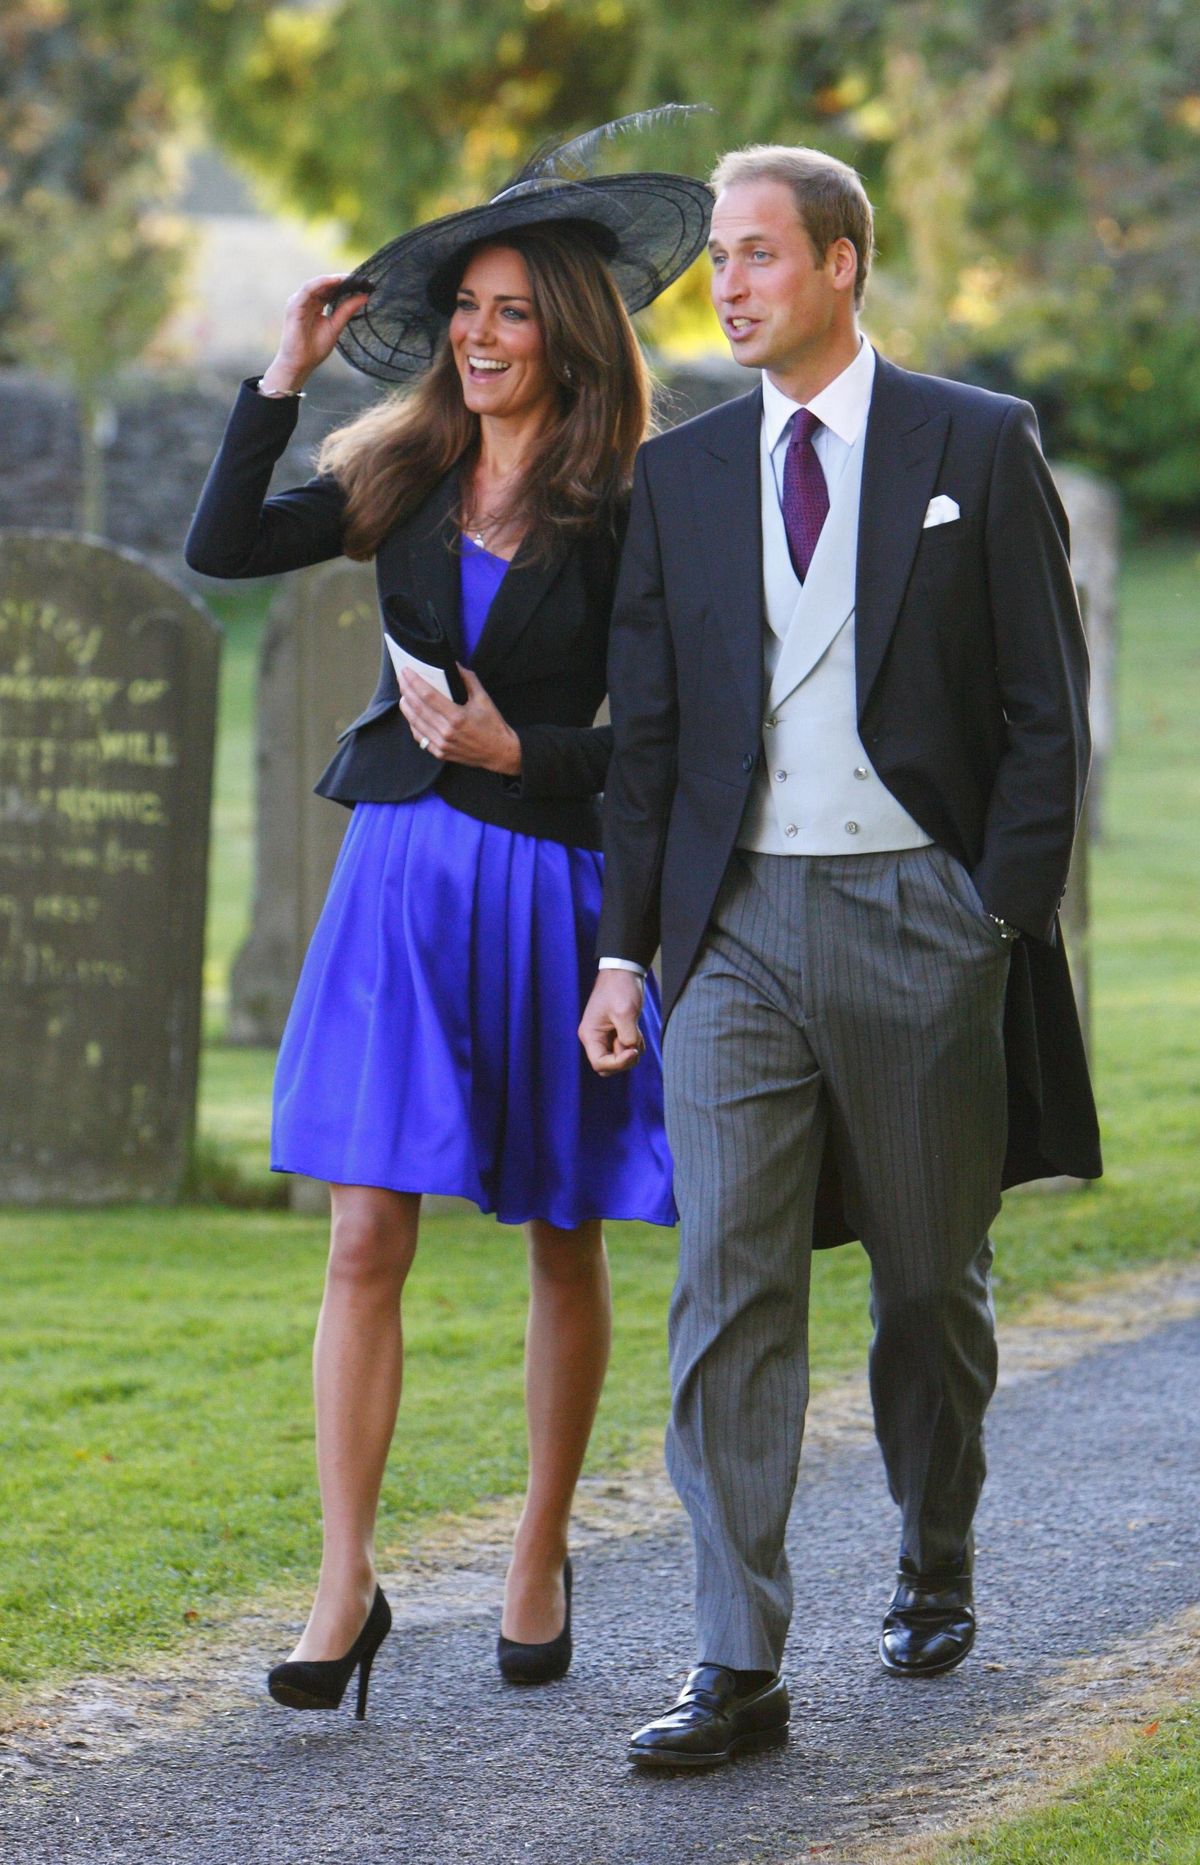 Britain’s Prince William and Kate Middleton leave the wedding of their friends Harry Mead and Rosie Bradford in the village of Northleach, England, last month. The couple announced their engagement Tuesday. (Associated Press)